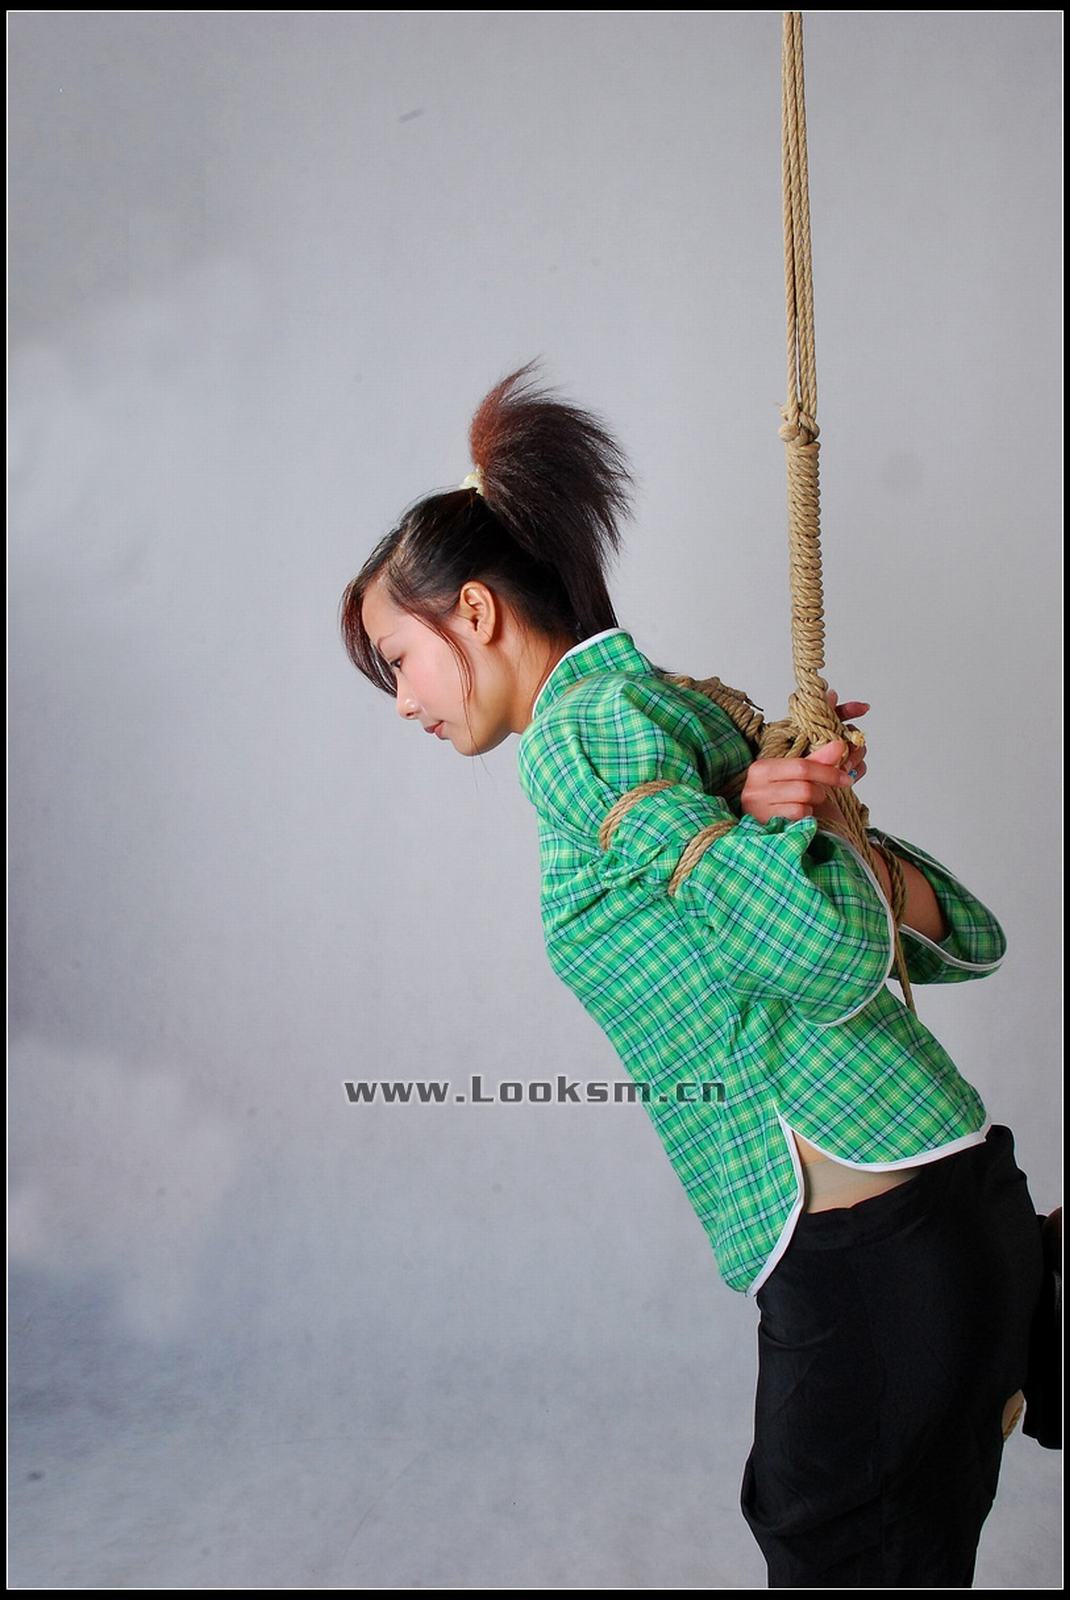 Chinese Rope Model 308